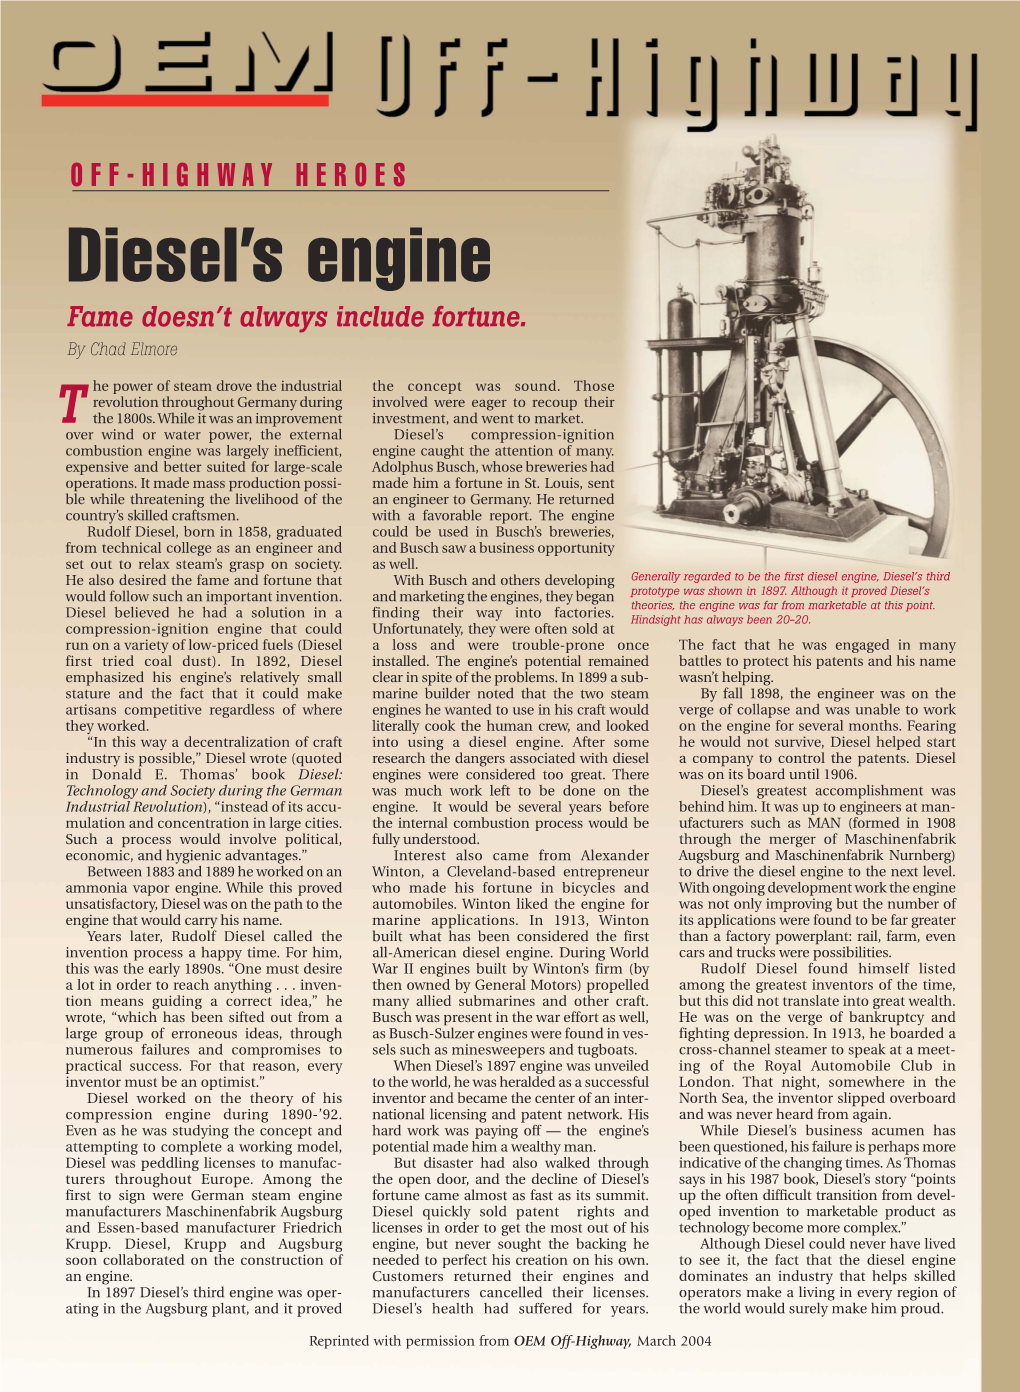 History of the Diesel Engine